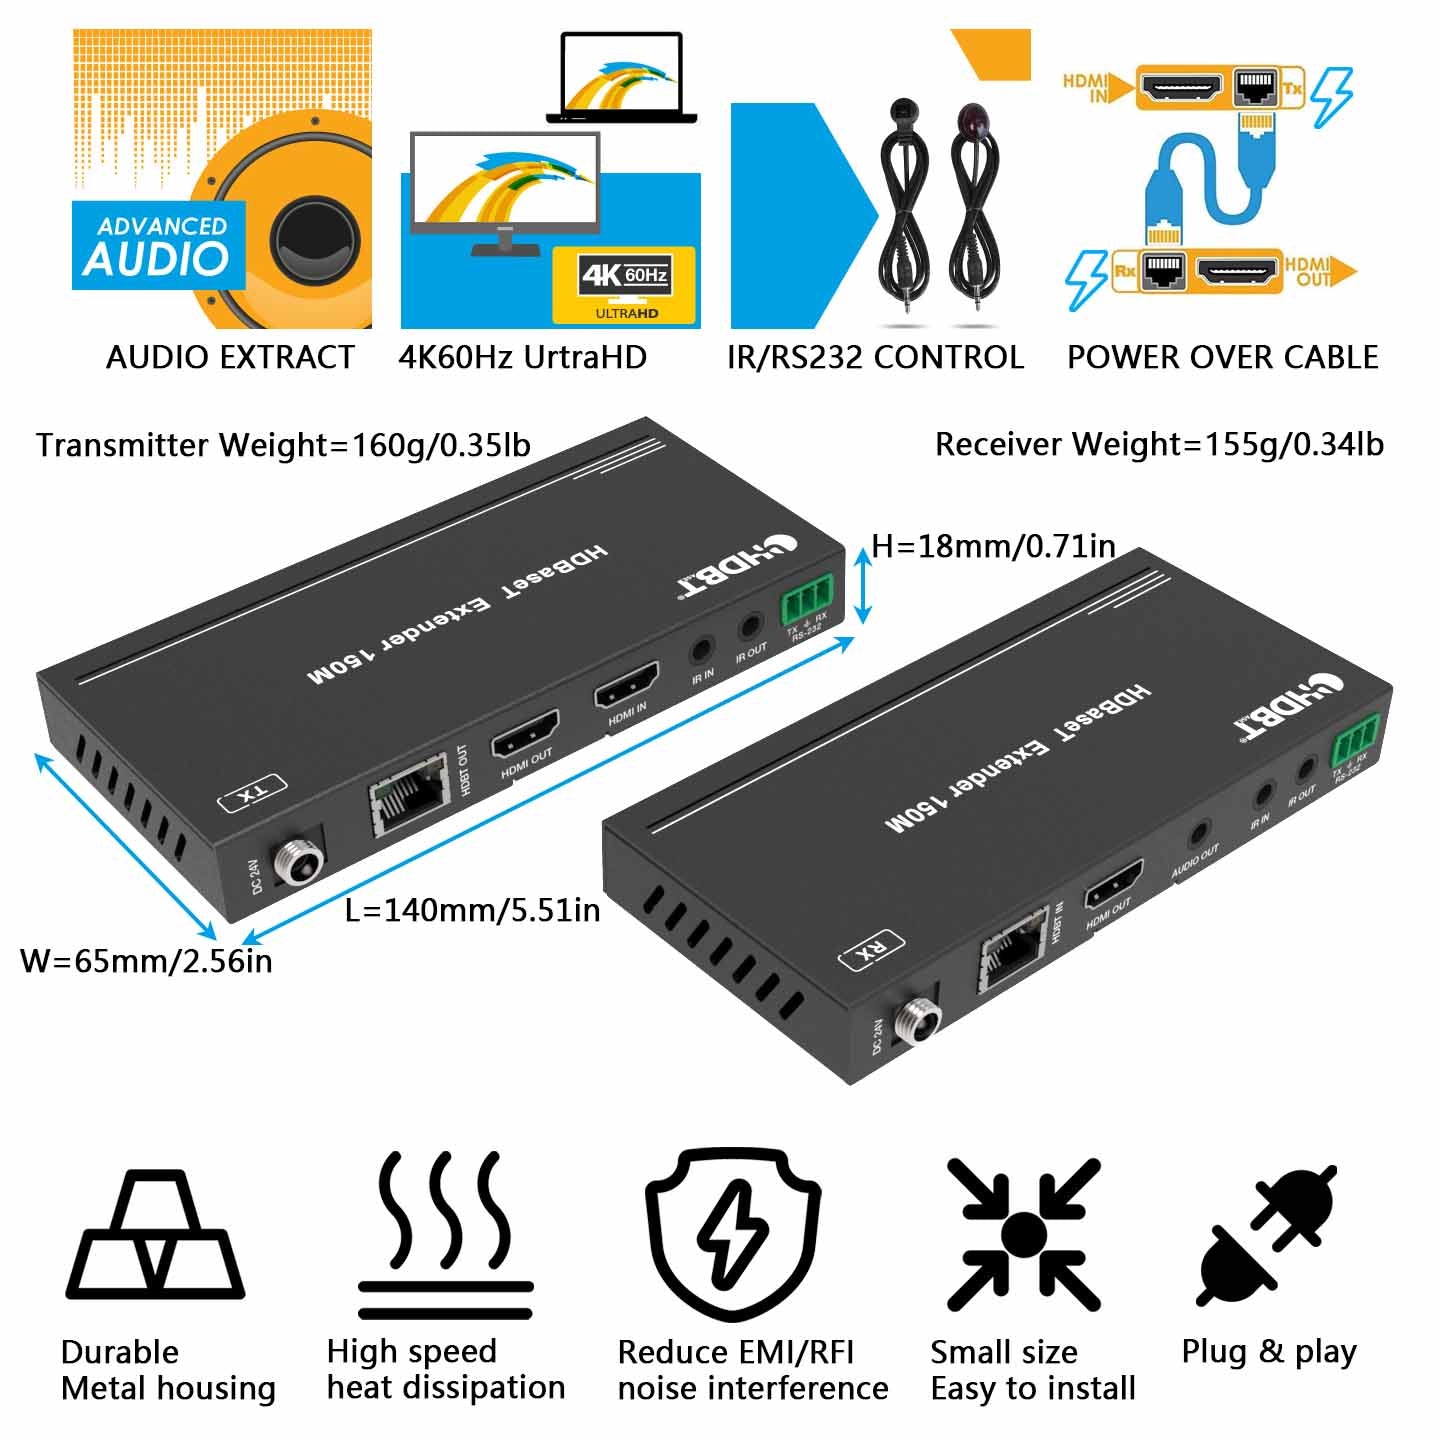 Additional Receiver for HDMI Extender/Splitter on Cat.6 Cable 1080p@60Hz up  to 120m - Audio Video Extender - Audio Video